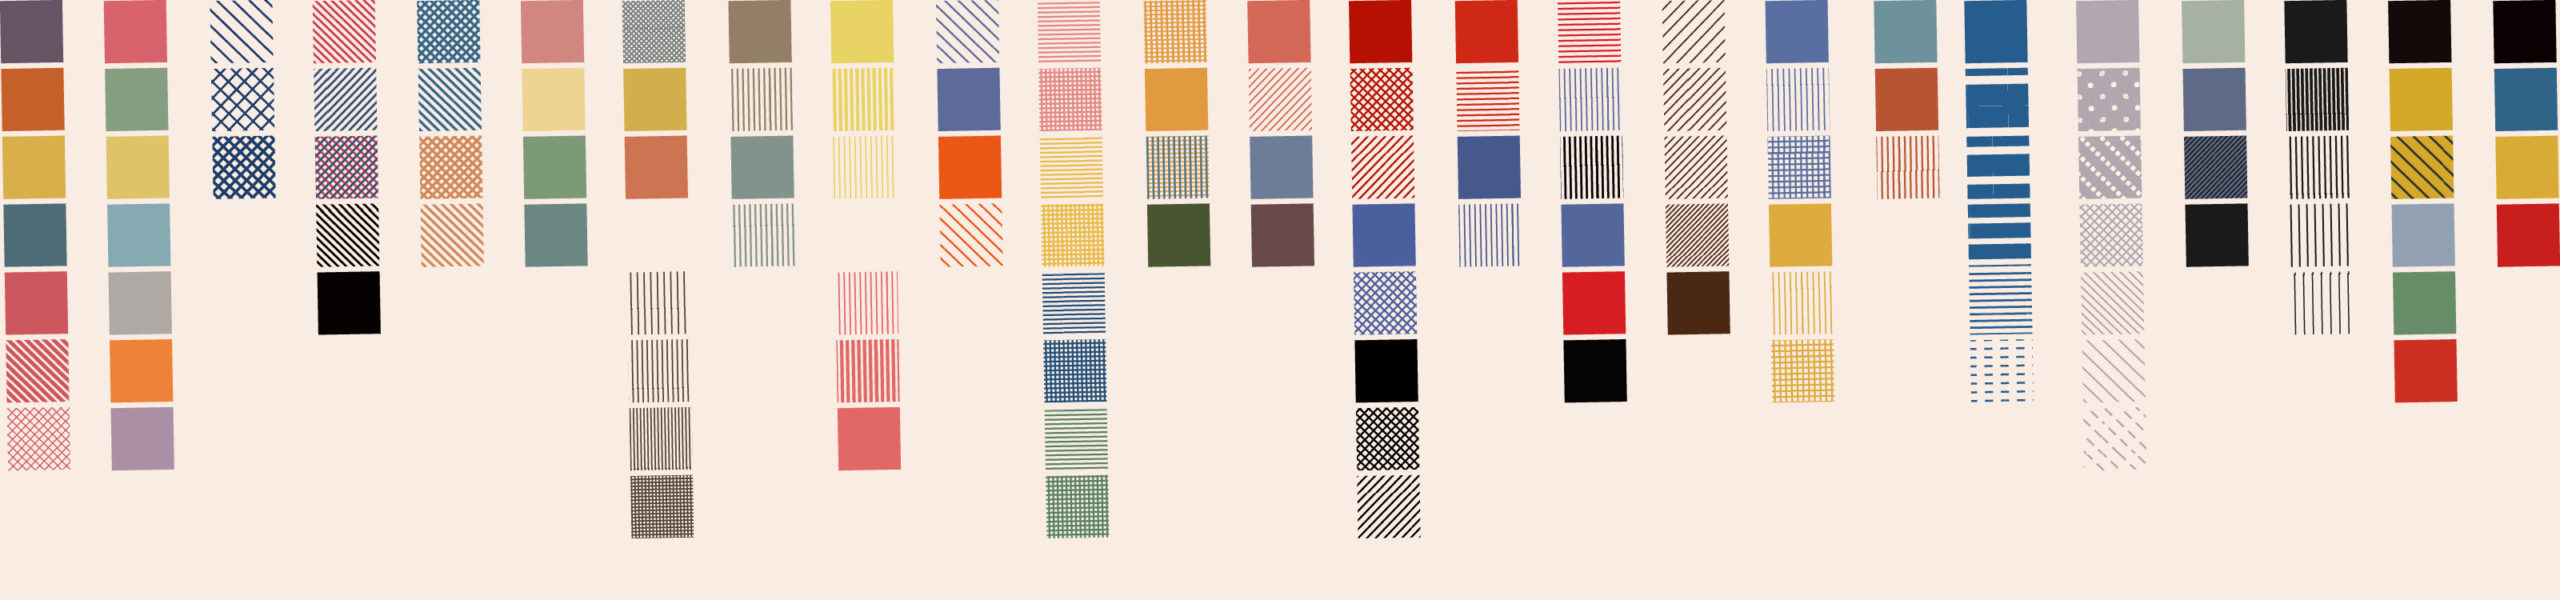 albumcolors-banner